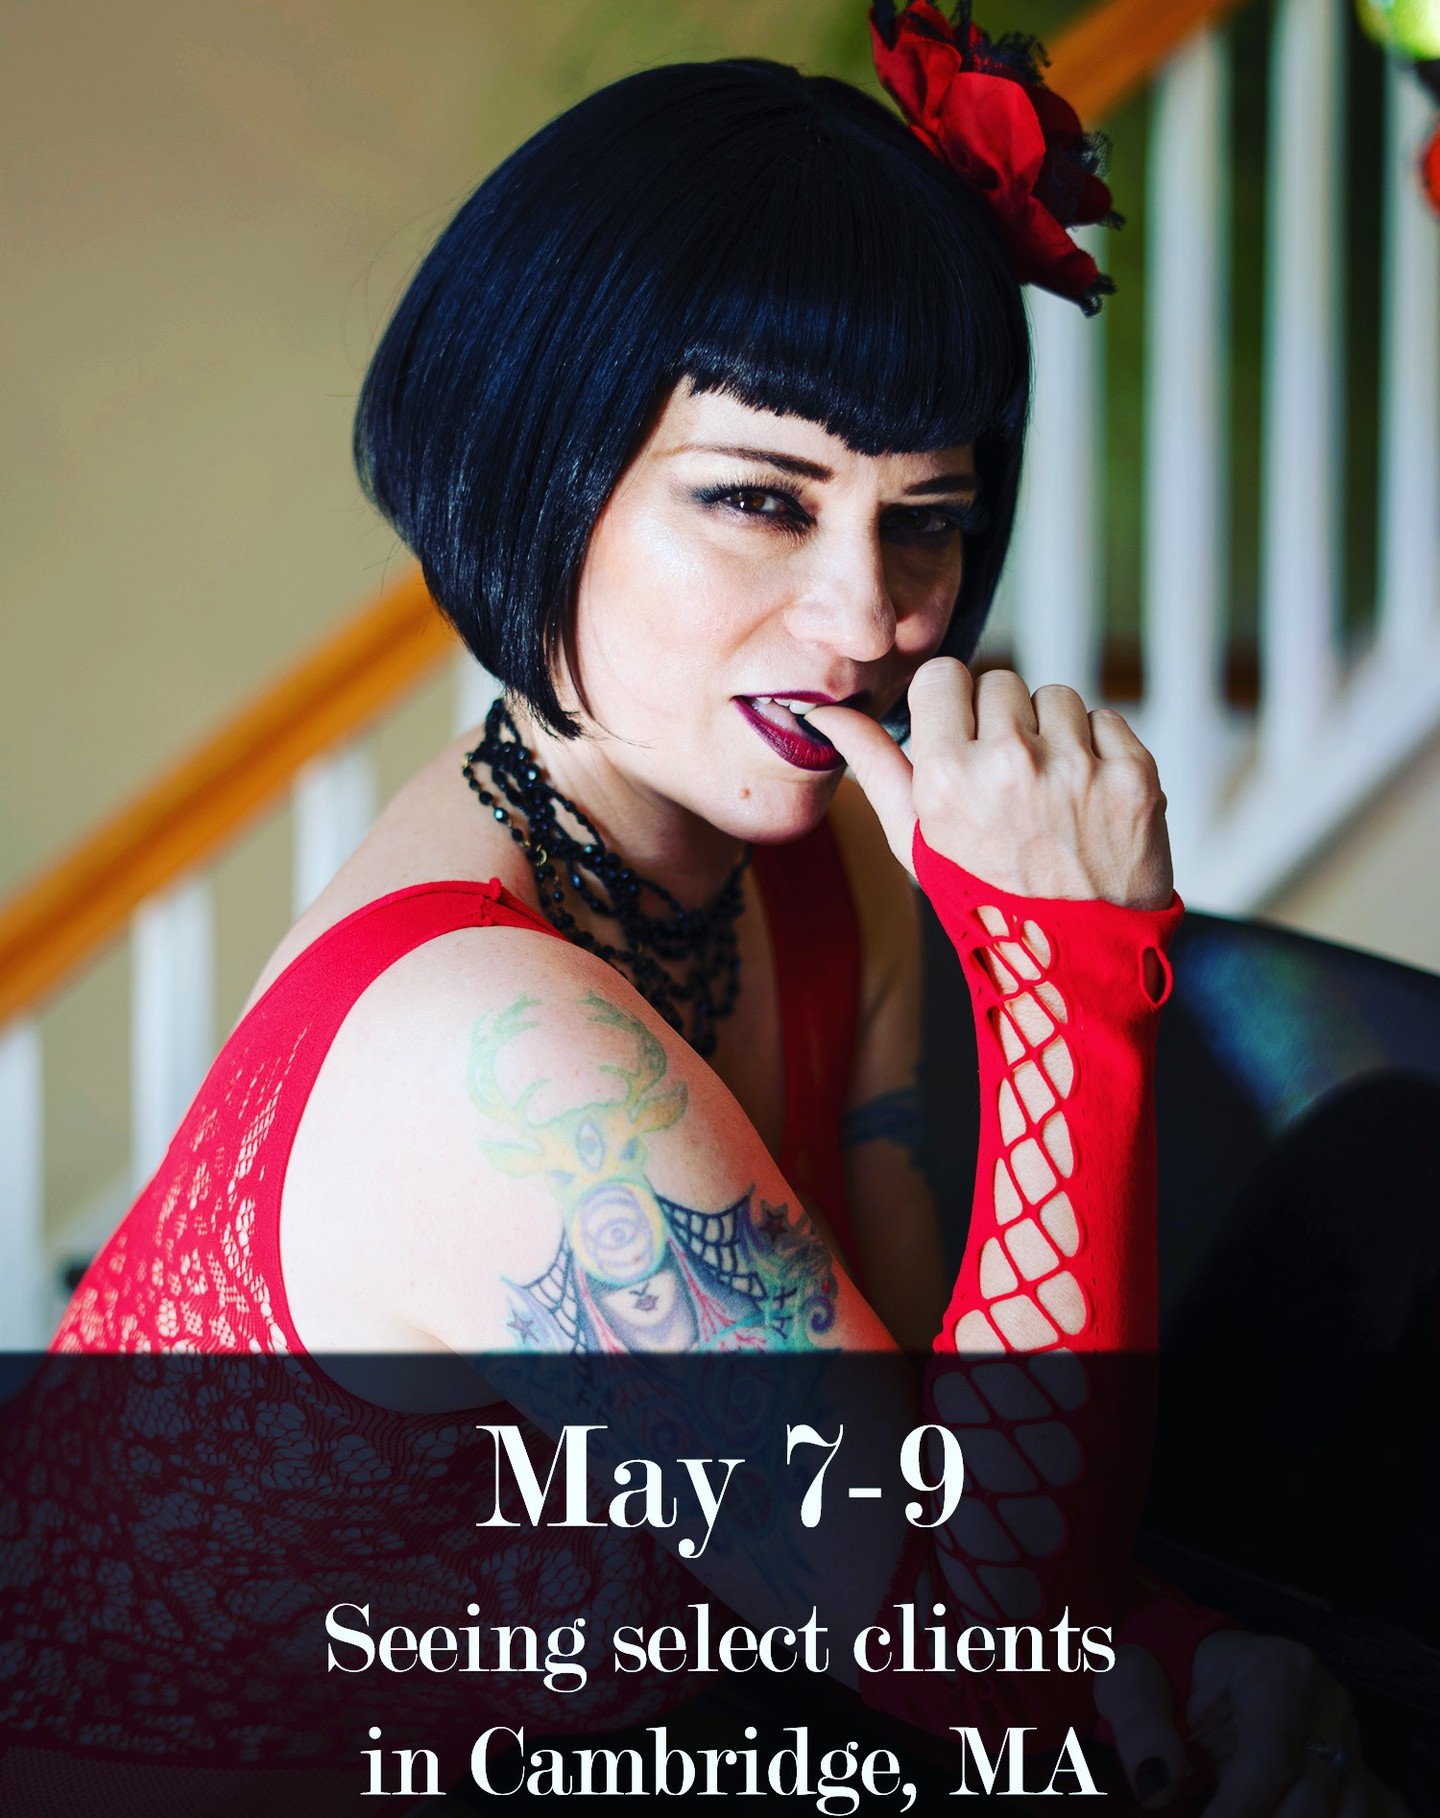 Now Booking time in Cambridge MA! May 7, 8 and 9 I will be available for in person consultations!